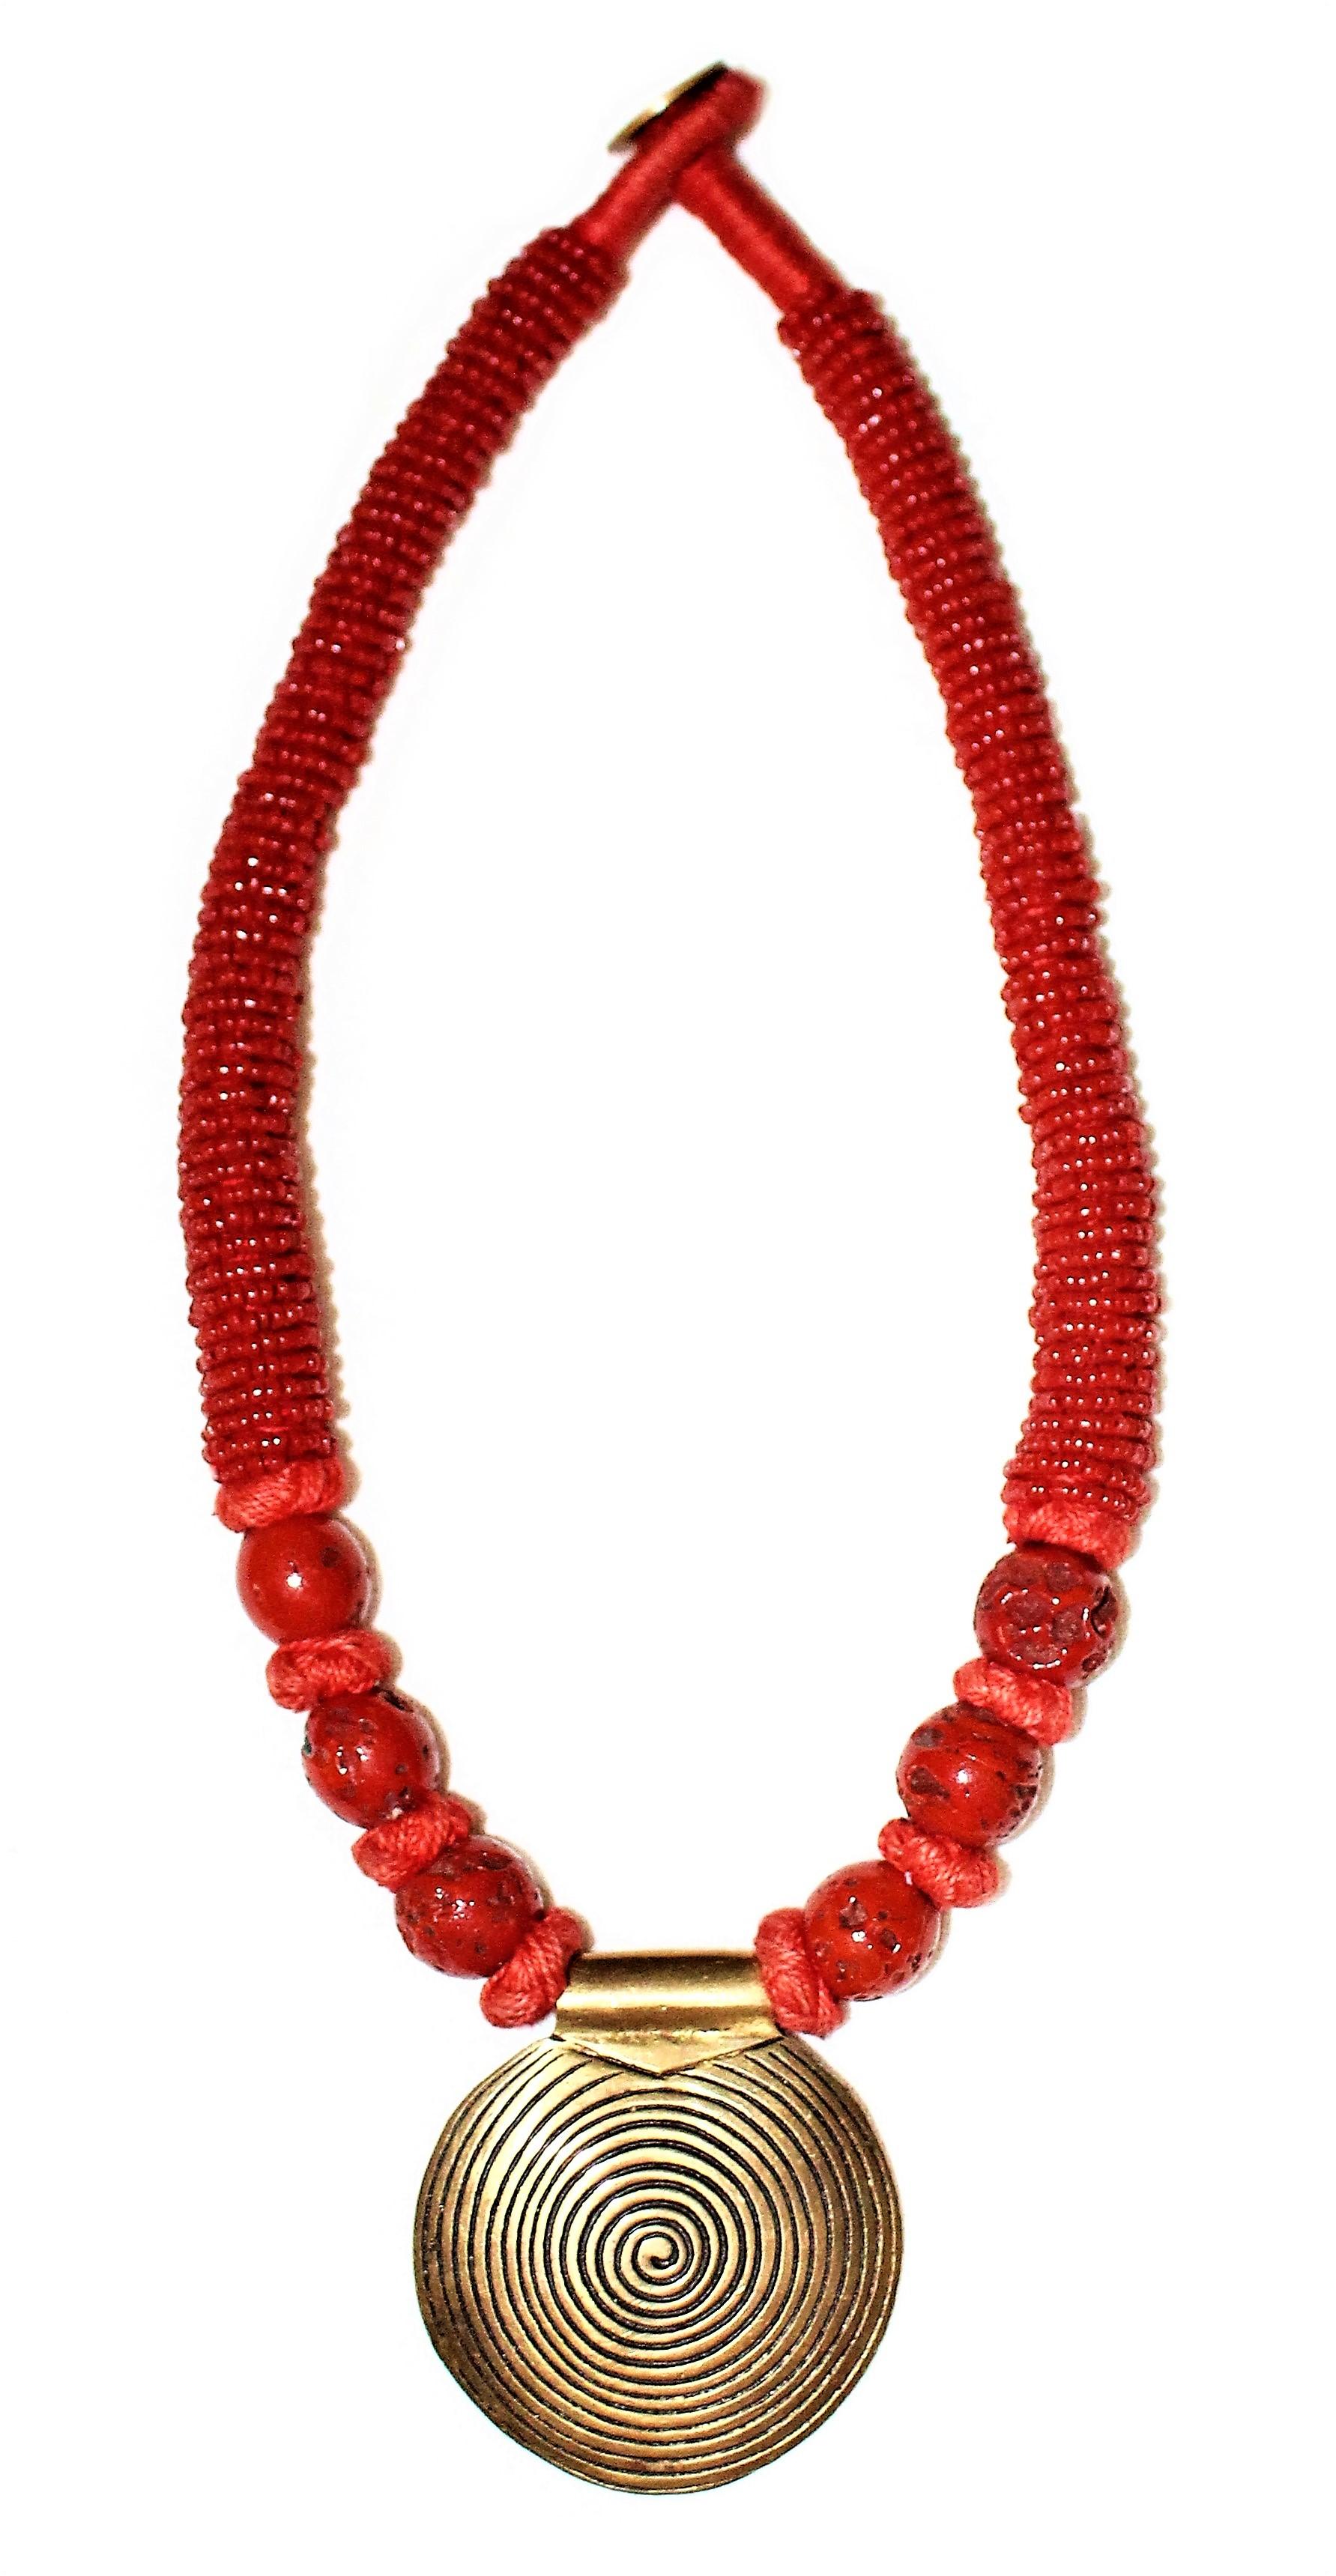 Circa 1970s to 1980s coral bead necklace with a large brass disk pendant.  The necklace is hand-tied together with coral-color thread and a looped thread clasp with a brass coin closure.  The necklace measures 17.5